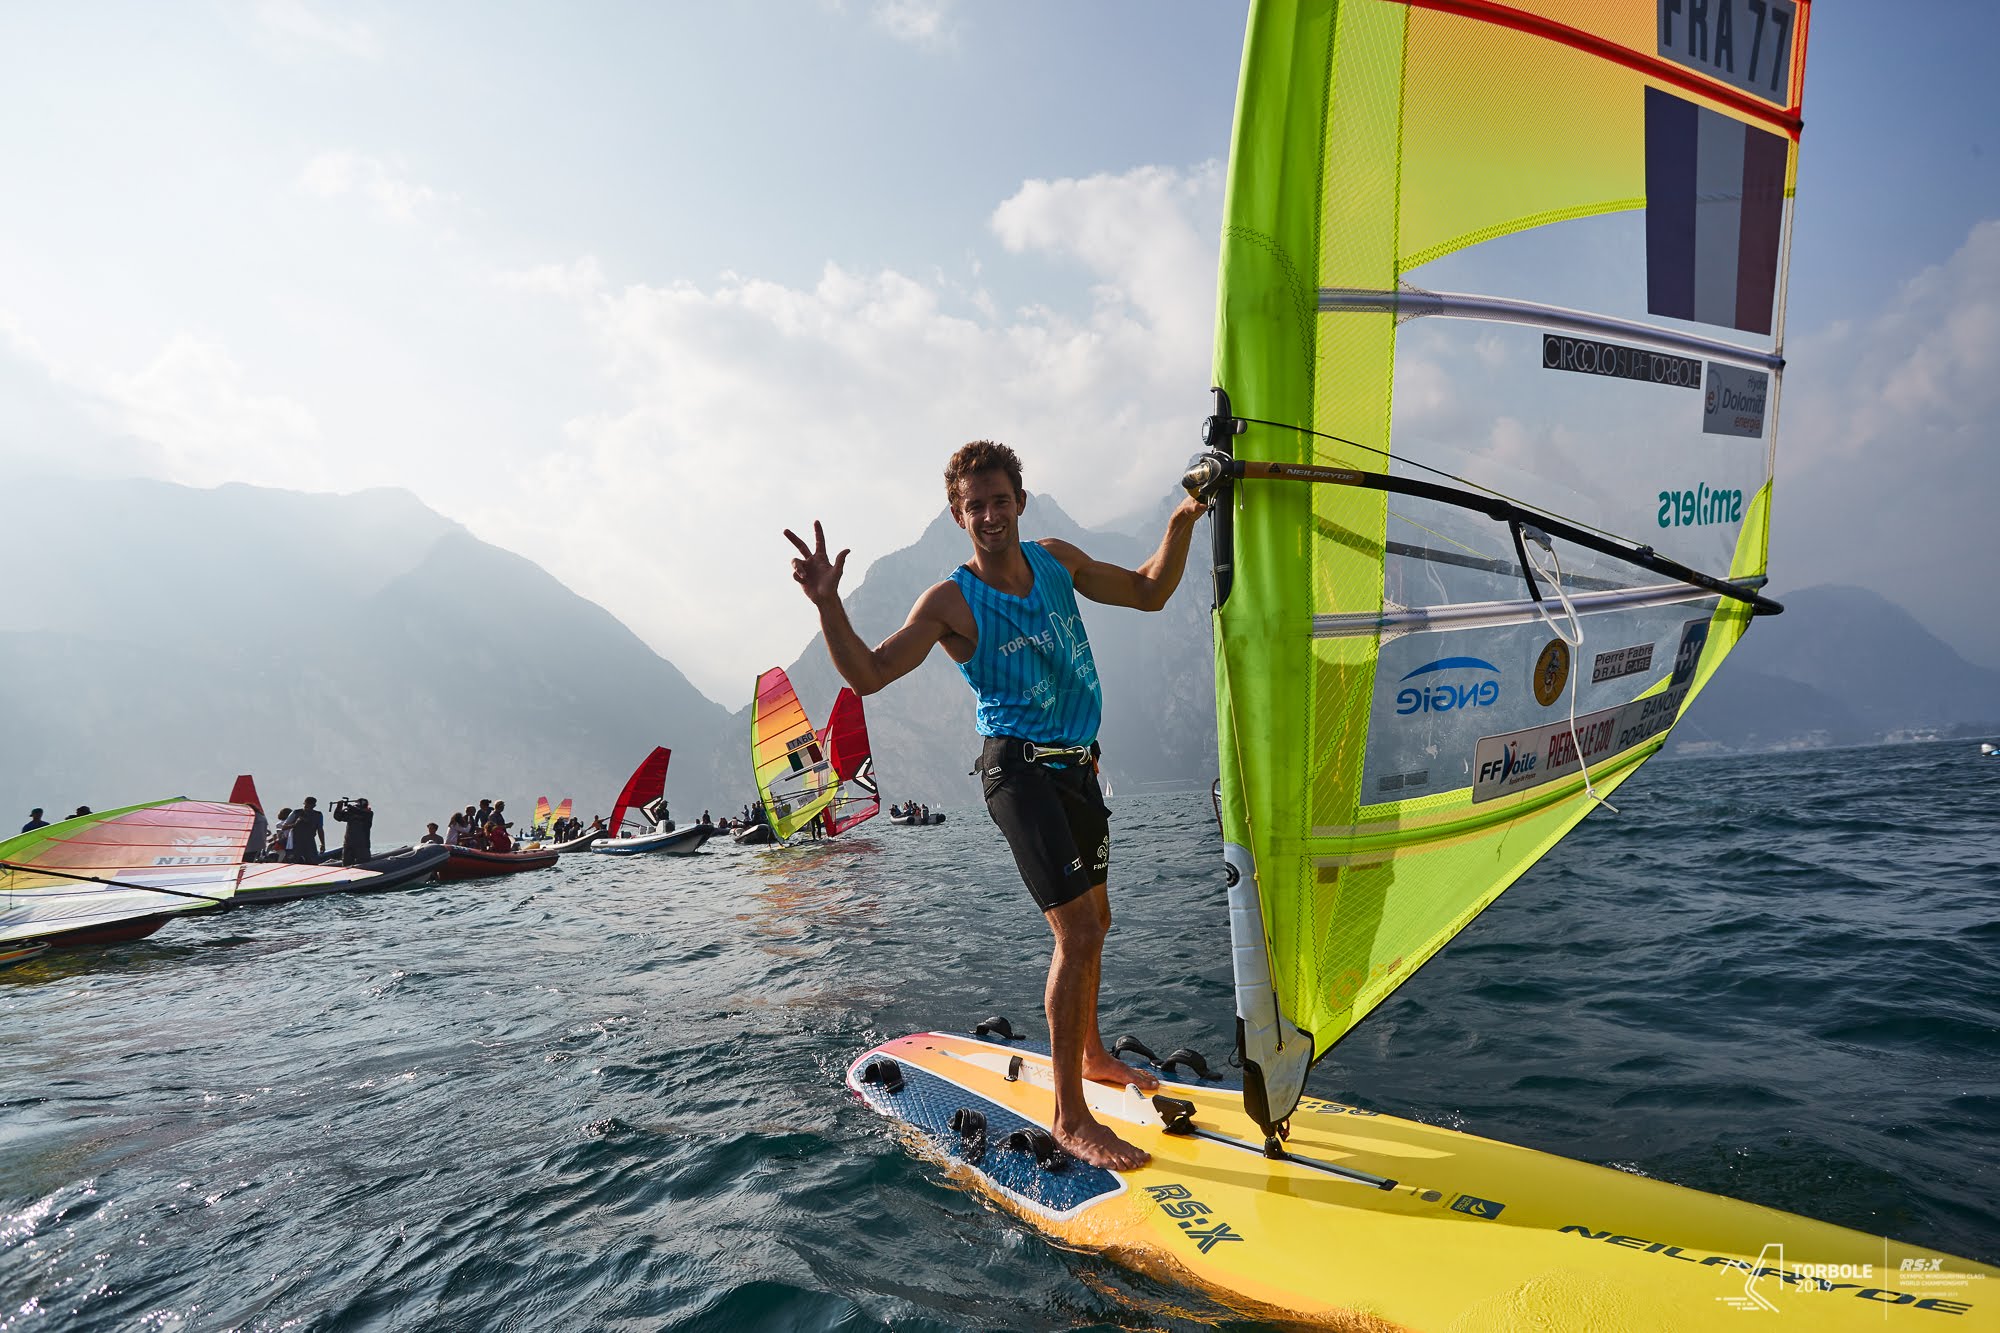 2019 RS:X WINDSURFING WORLD CHAMPIONSHIPS including the 2019 Lake Garda RS:X U21 Windsurfing Championships || 2019-09-28, Torbole, Italy || © Copyright 2019 || Robert Hajduk - RS:X Class || All Rights Reserved ||